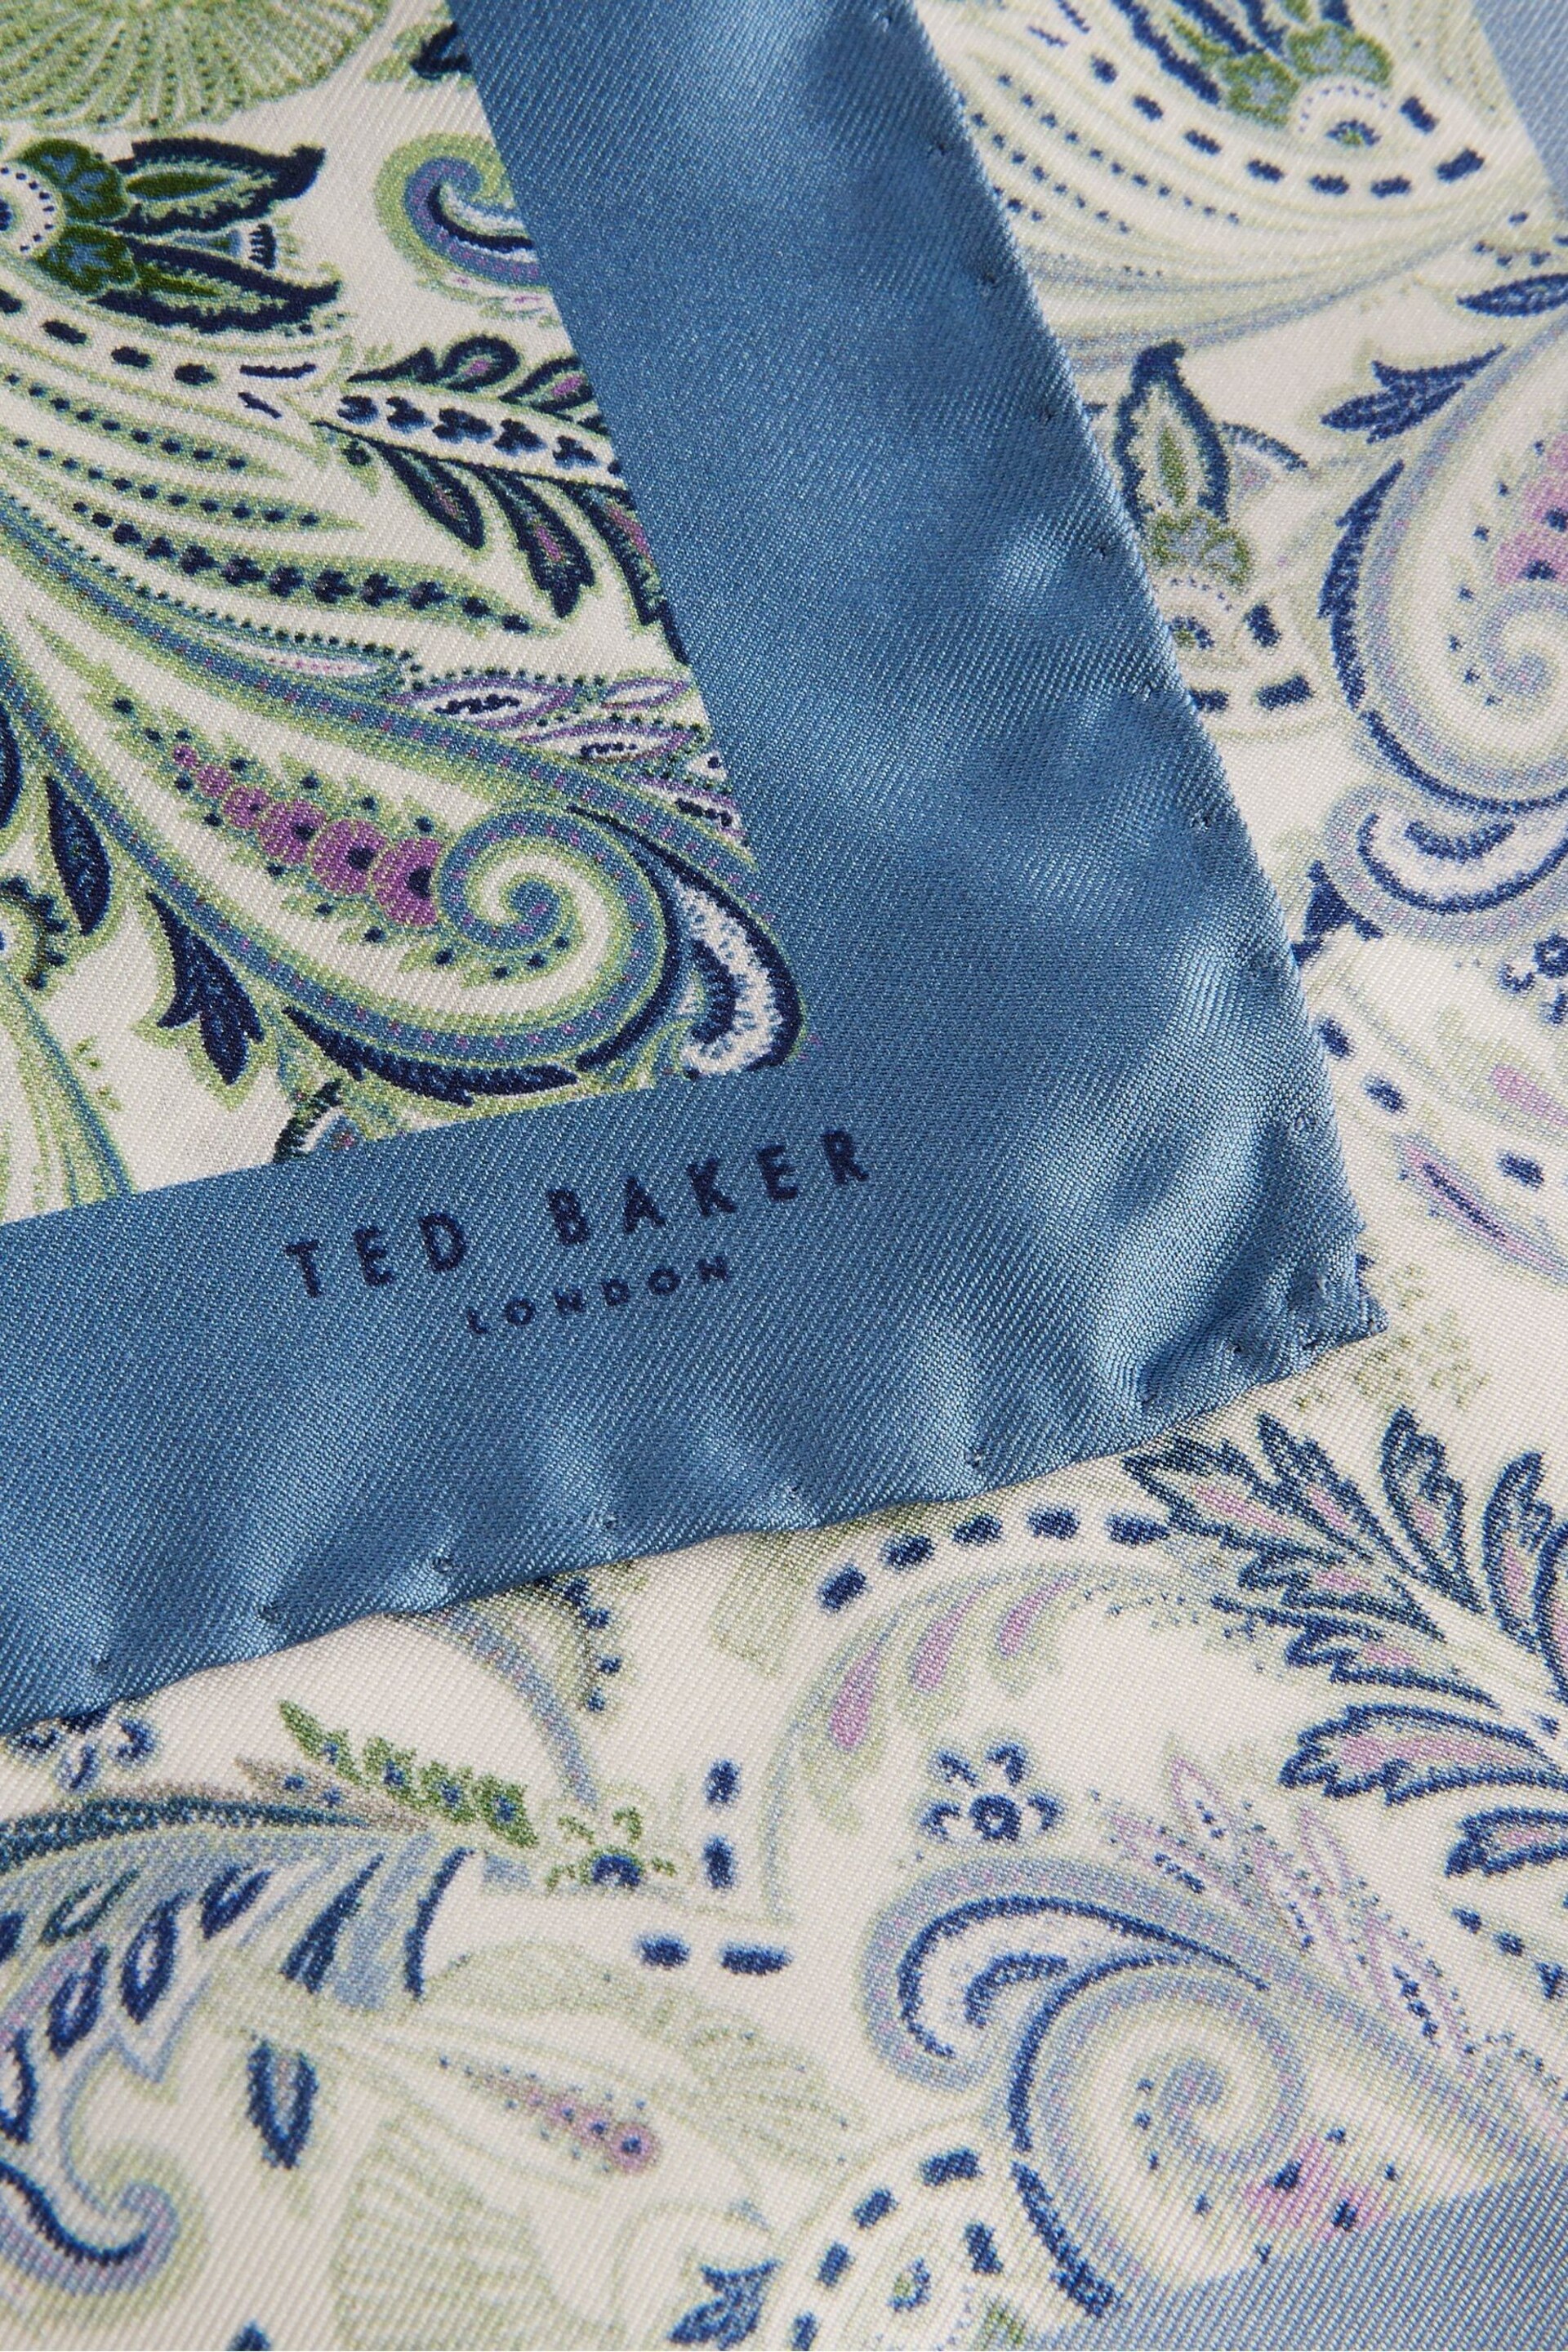 Ted Baker White Echezp Tonal Floral Silk Pocket Square/Tie - Image 3 of 3